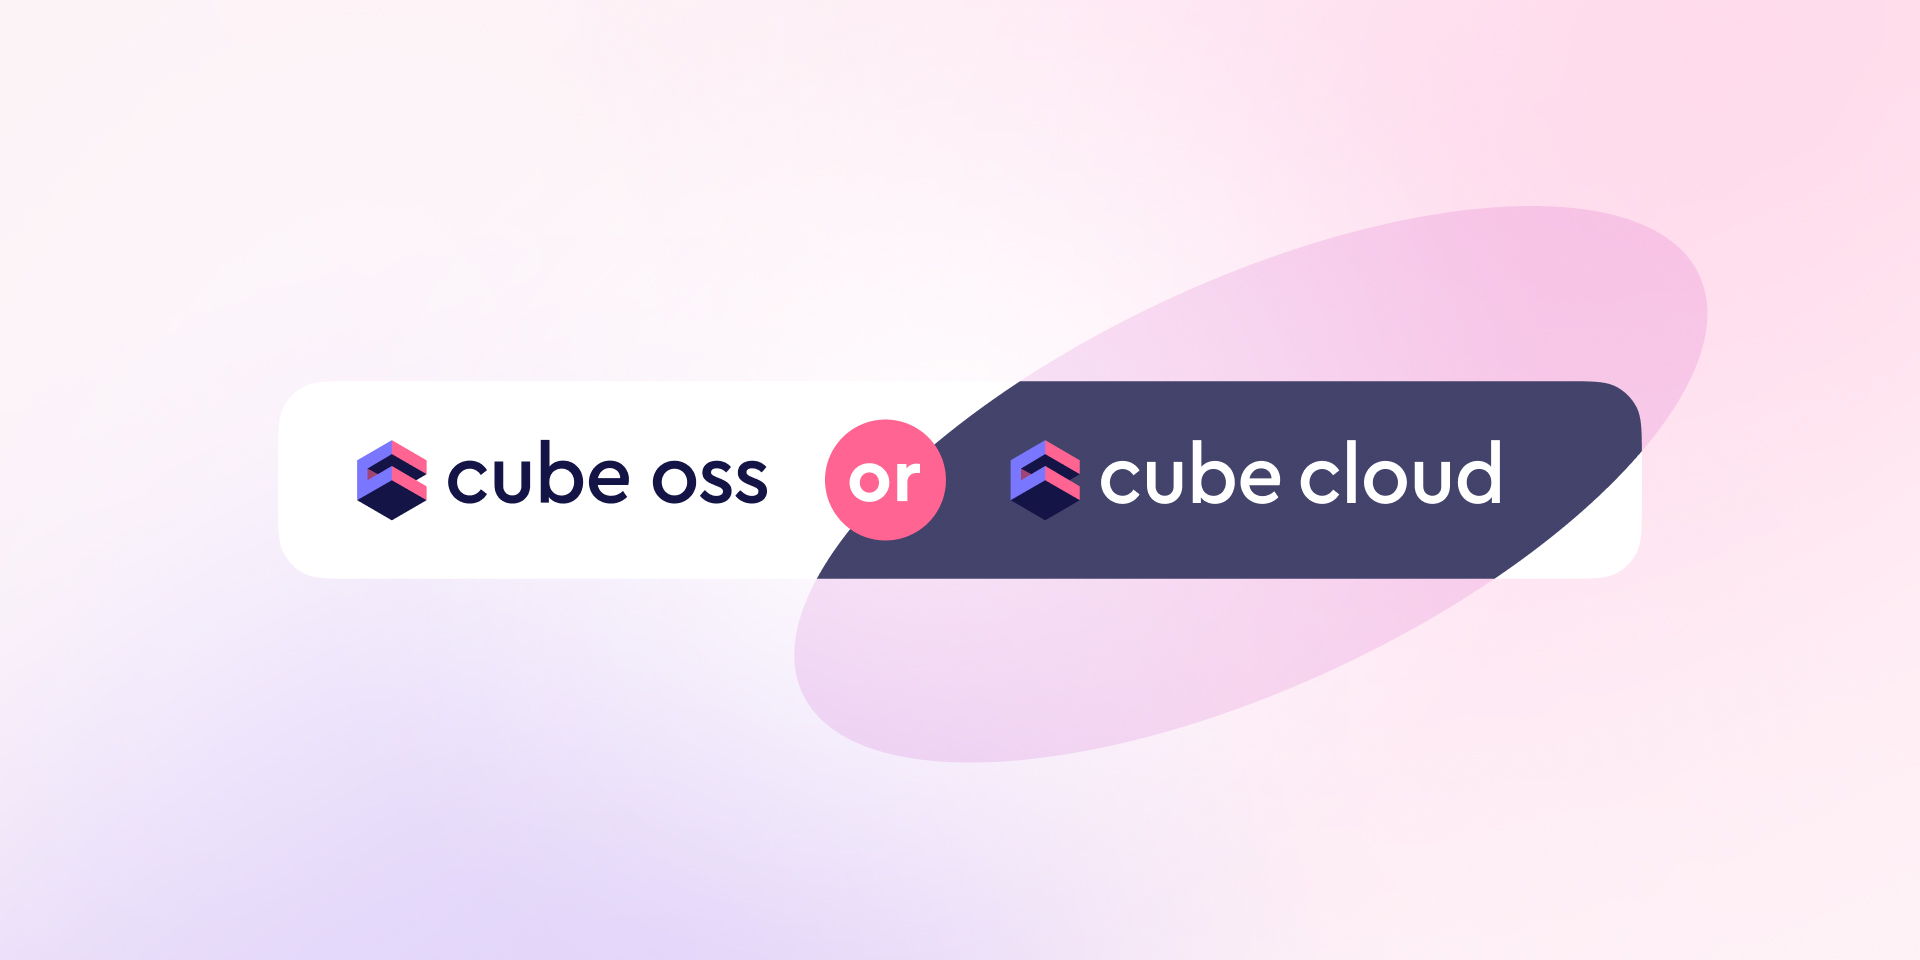 Cover of the 'Building your data stack: Cube Cloud or OSS ' blog post